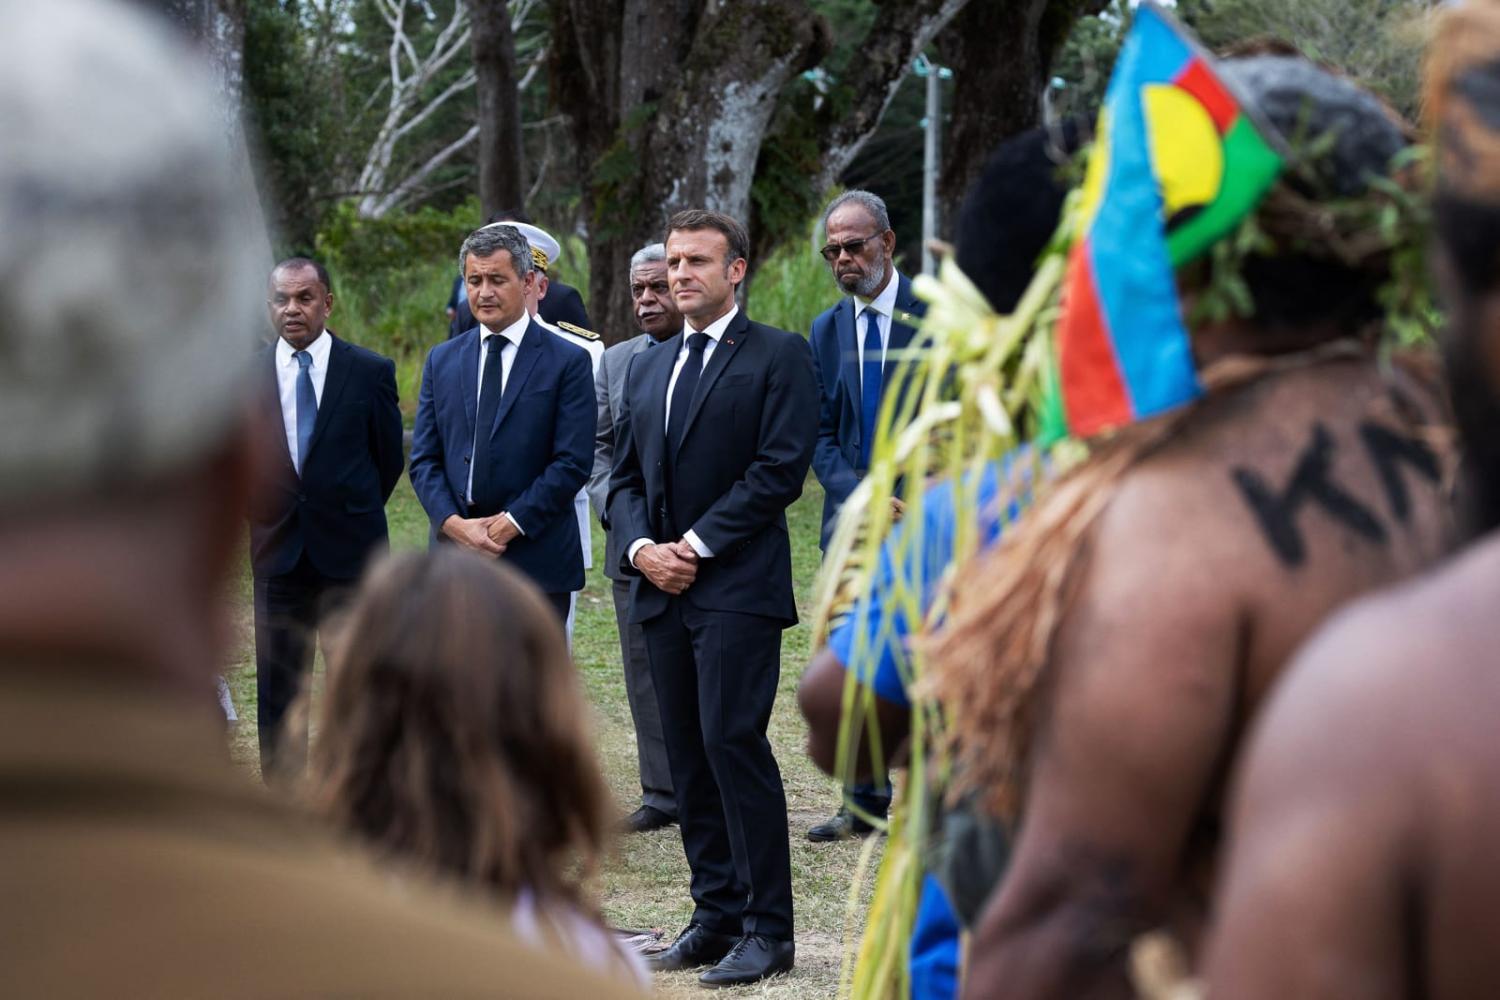 French President Emmanuel Macron, centre, during a visit to New Caledonia in July (Raphael Lafargue via AFP/Getty Images)